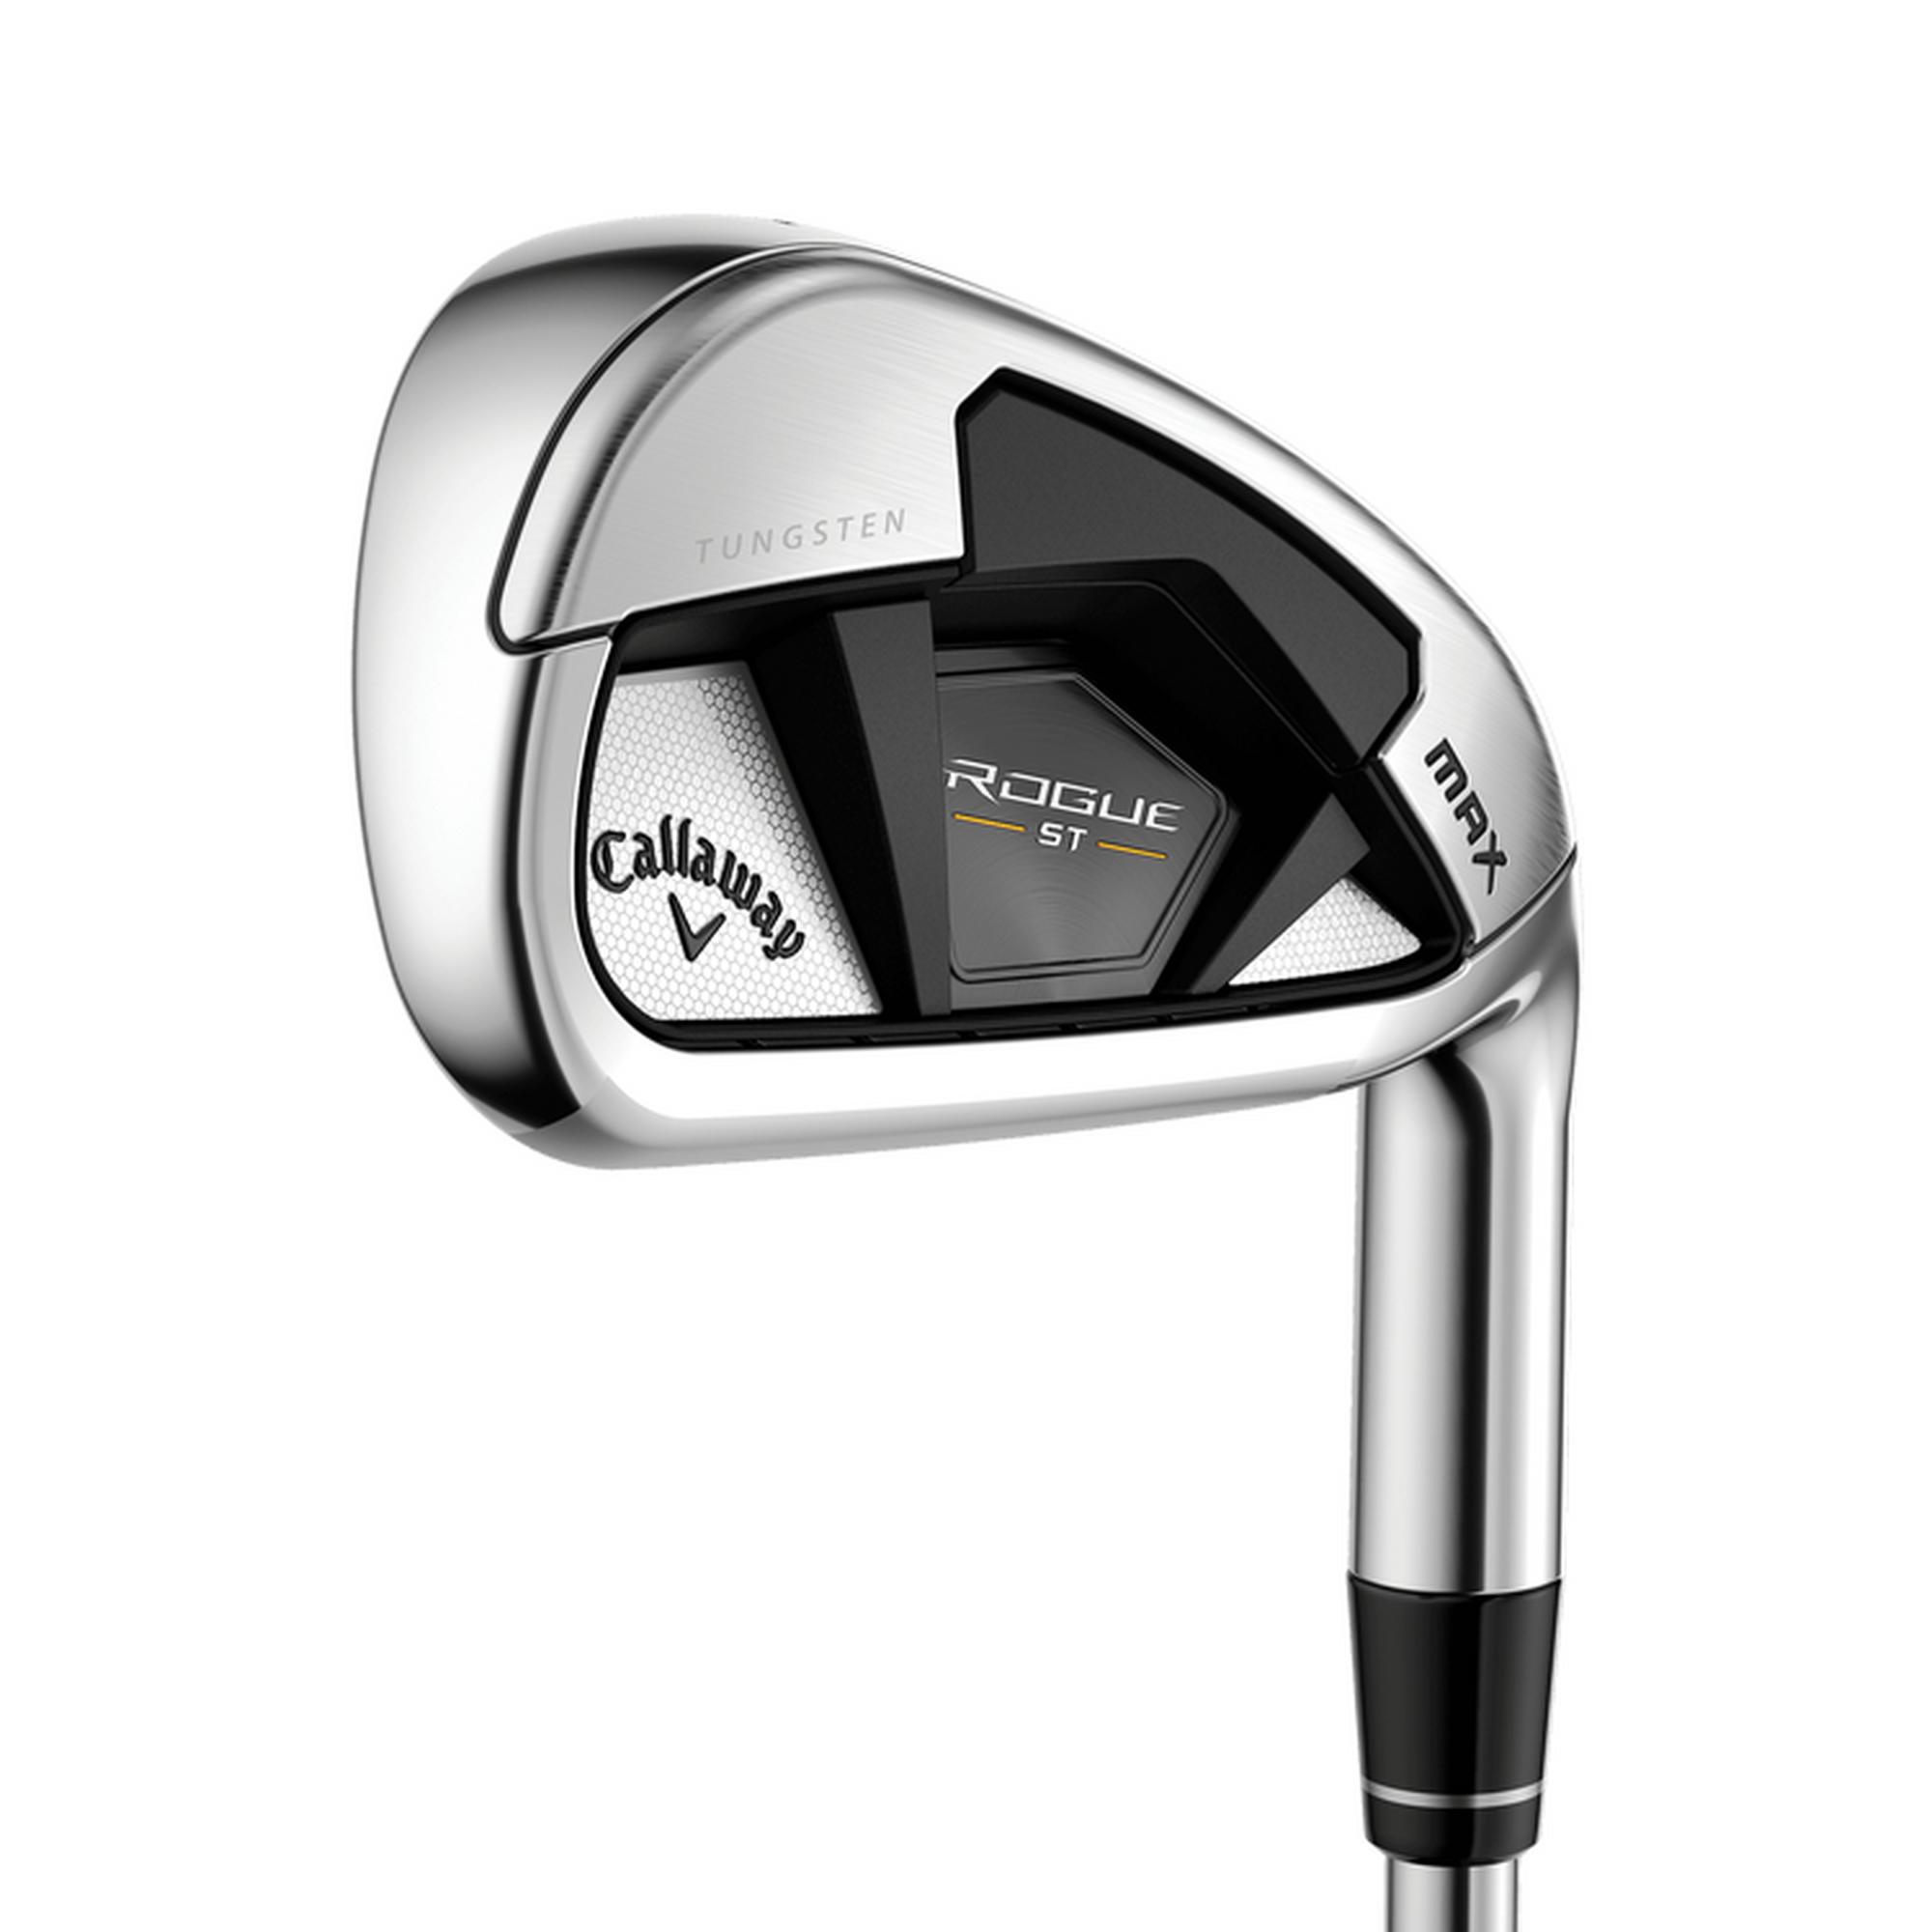 Rogue ST Max 5-PW AW Iron Set with Steel Shafts